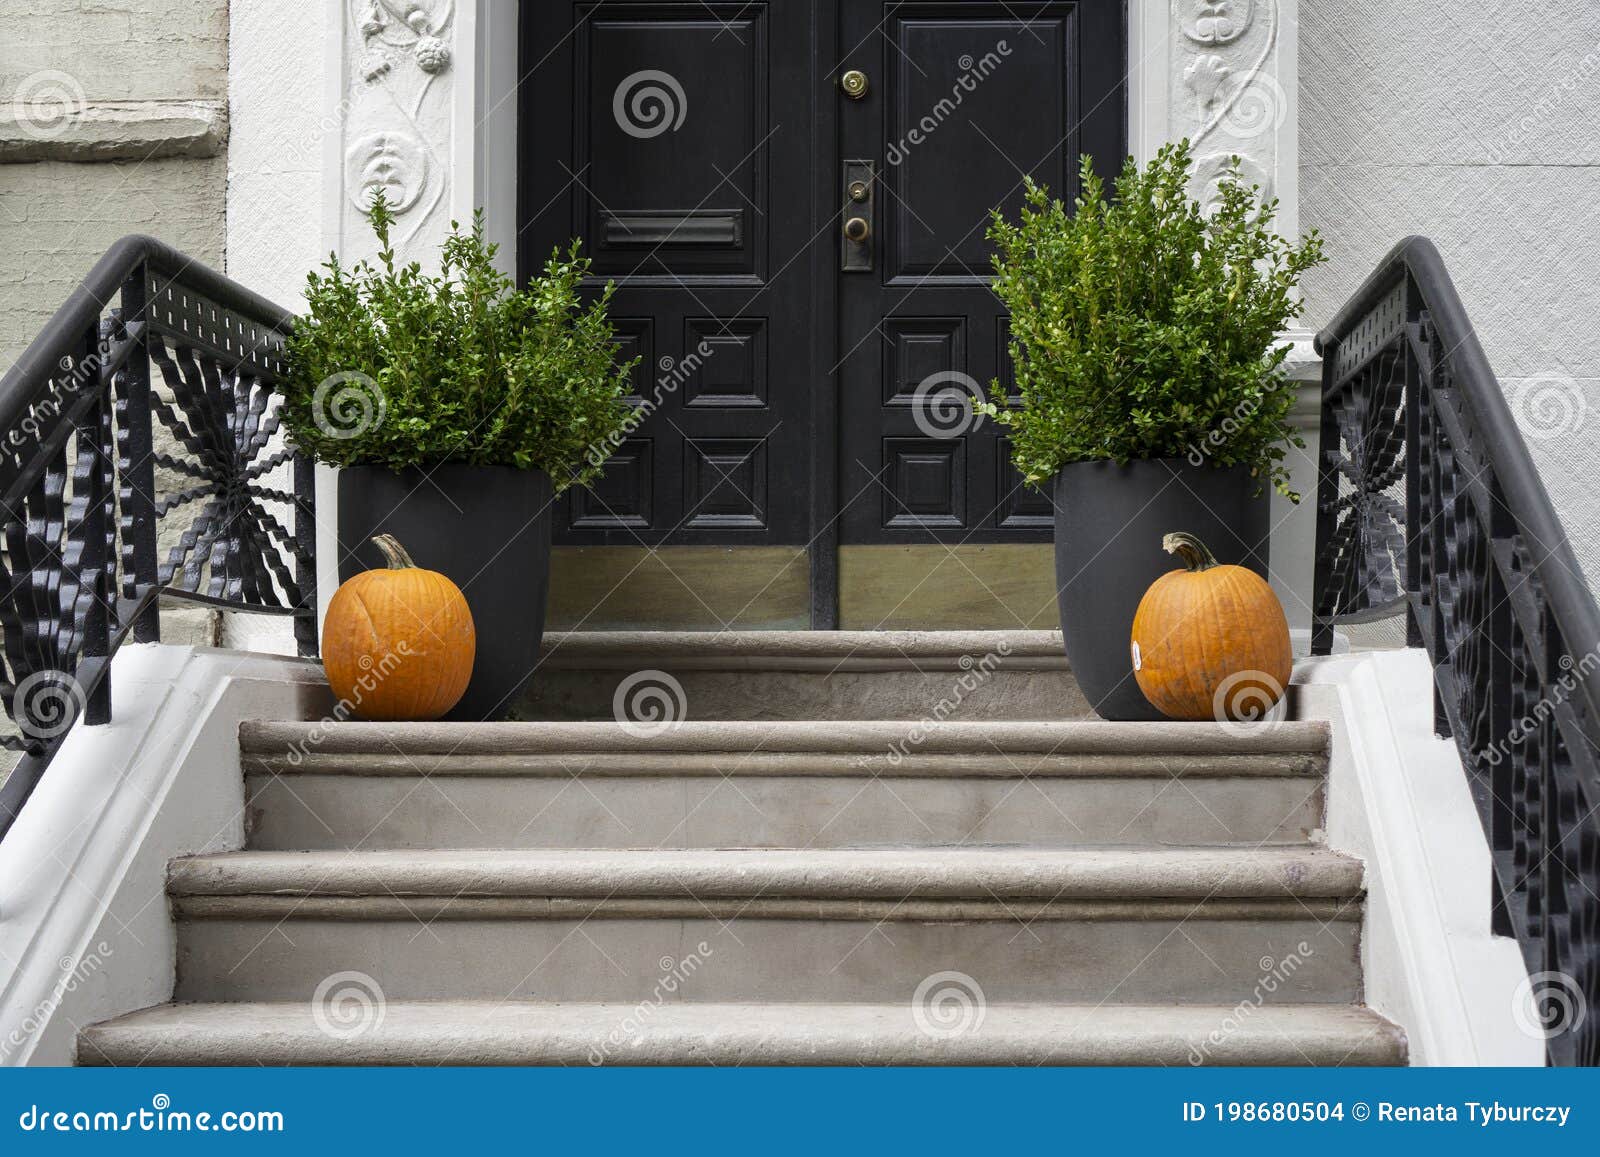 thanksgiving decorated front door with pumpkins and potted plants. autumn season